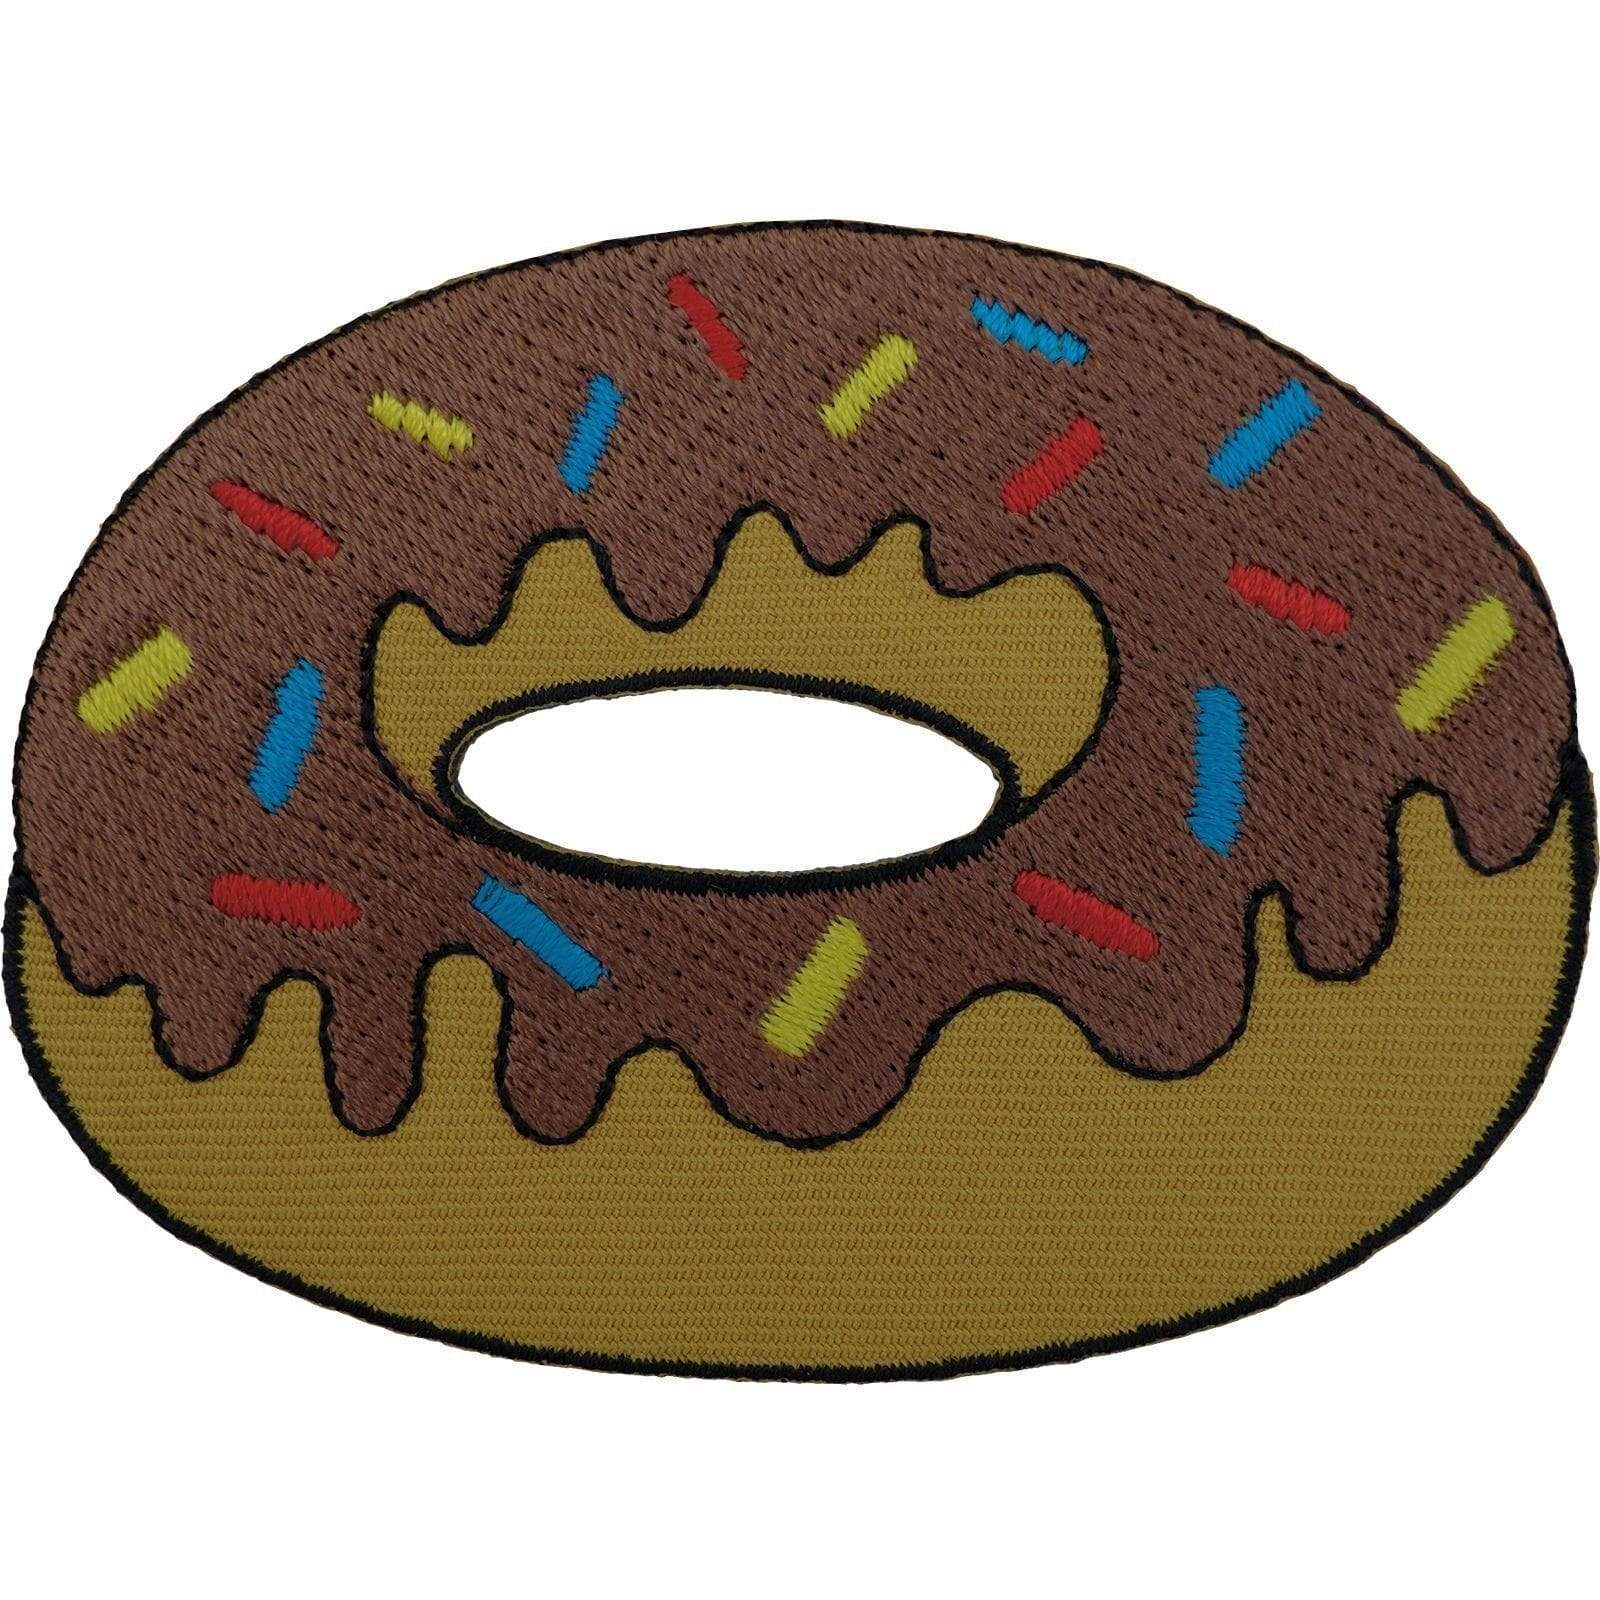 Doughnut Patch Embroidered Chocolate Donut Sew / Iron On Badge Food Embroidery